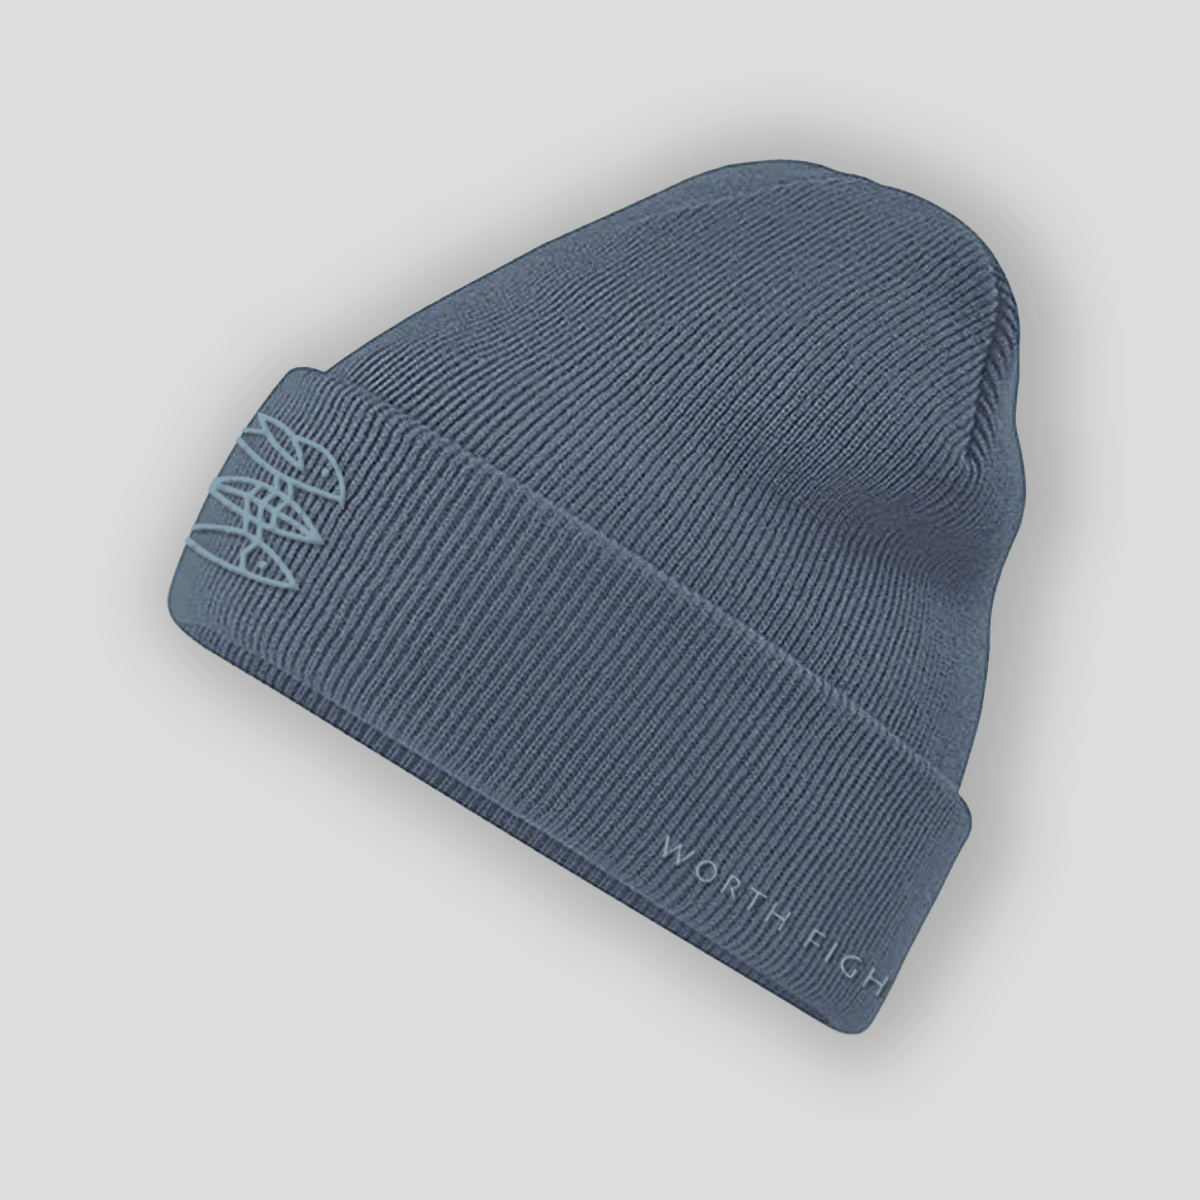 Beanie "Worth fighting for" Ocean Blue